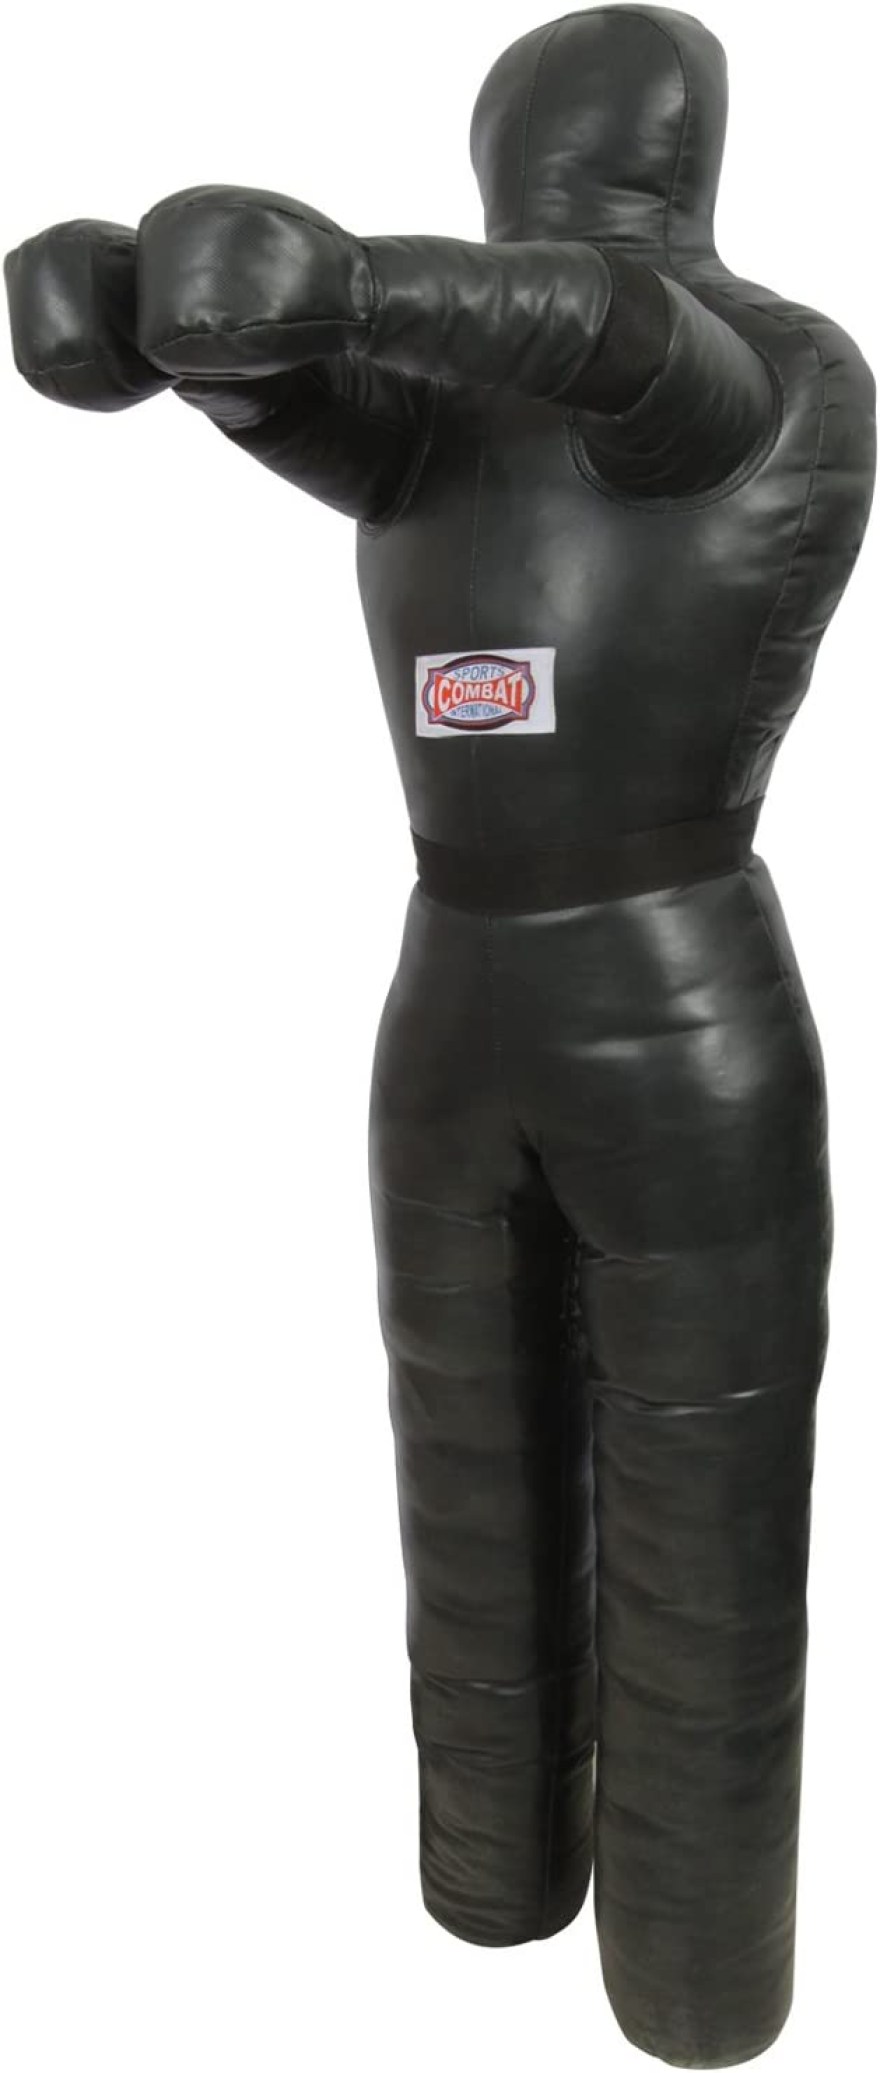 Picture of: Combat Sports Legged Grappling Dummy